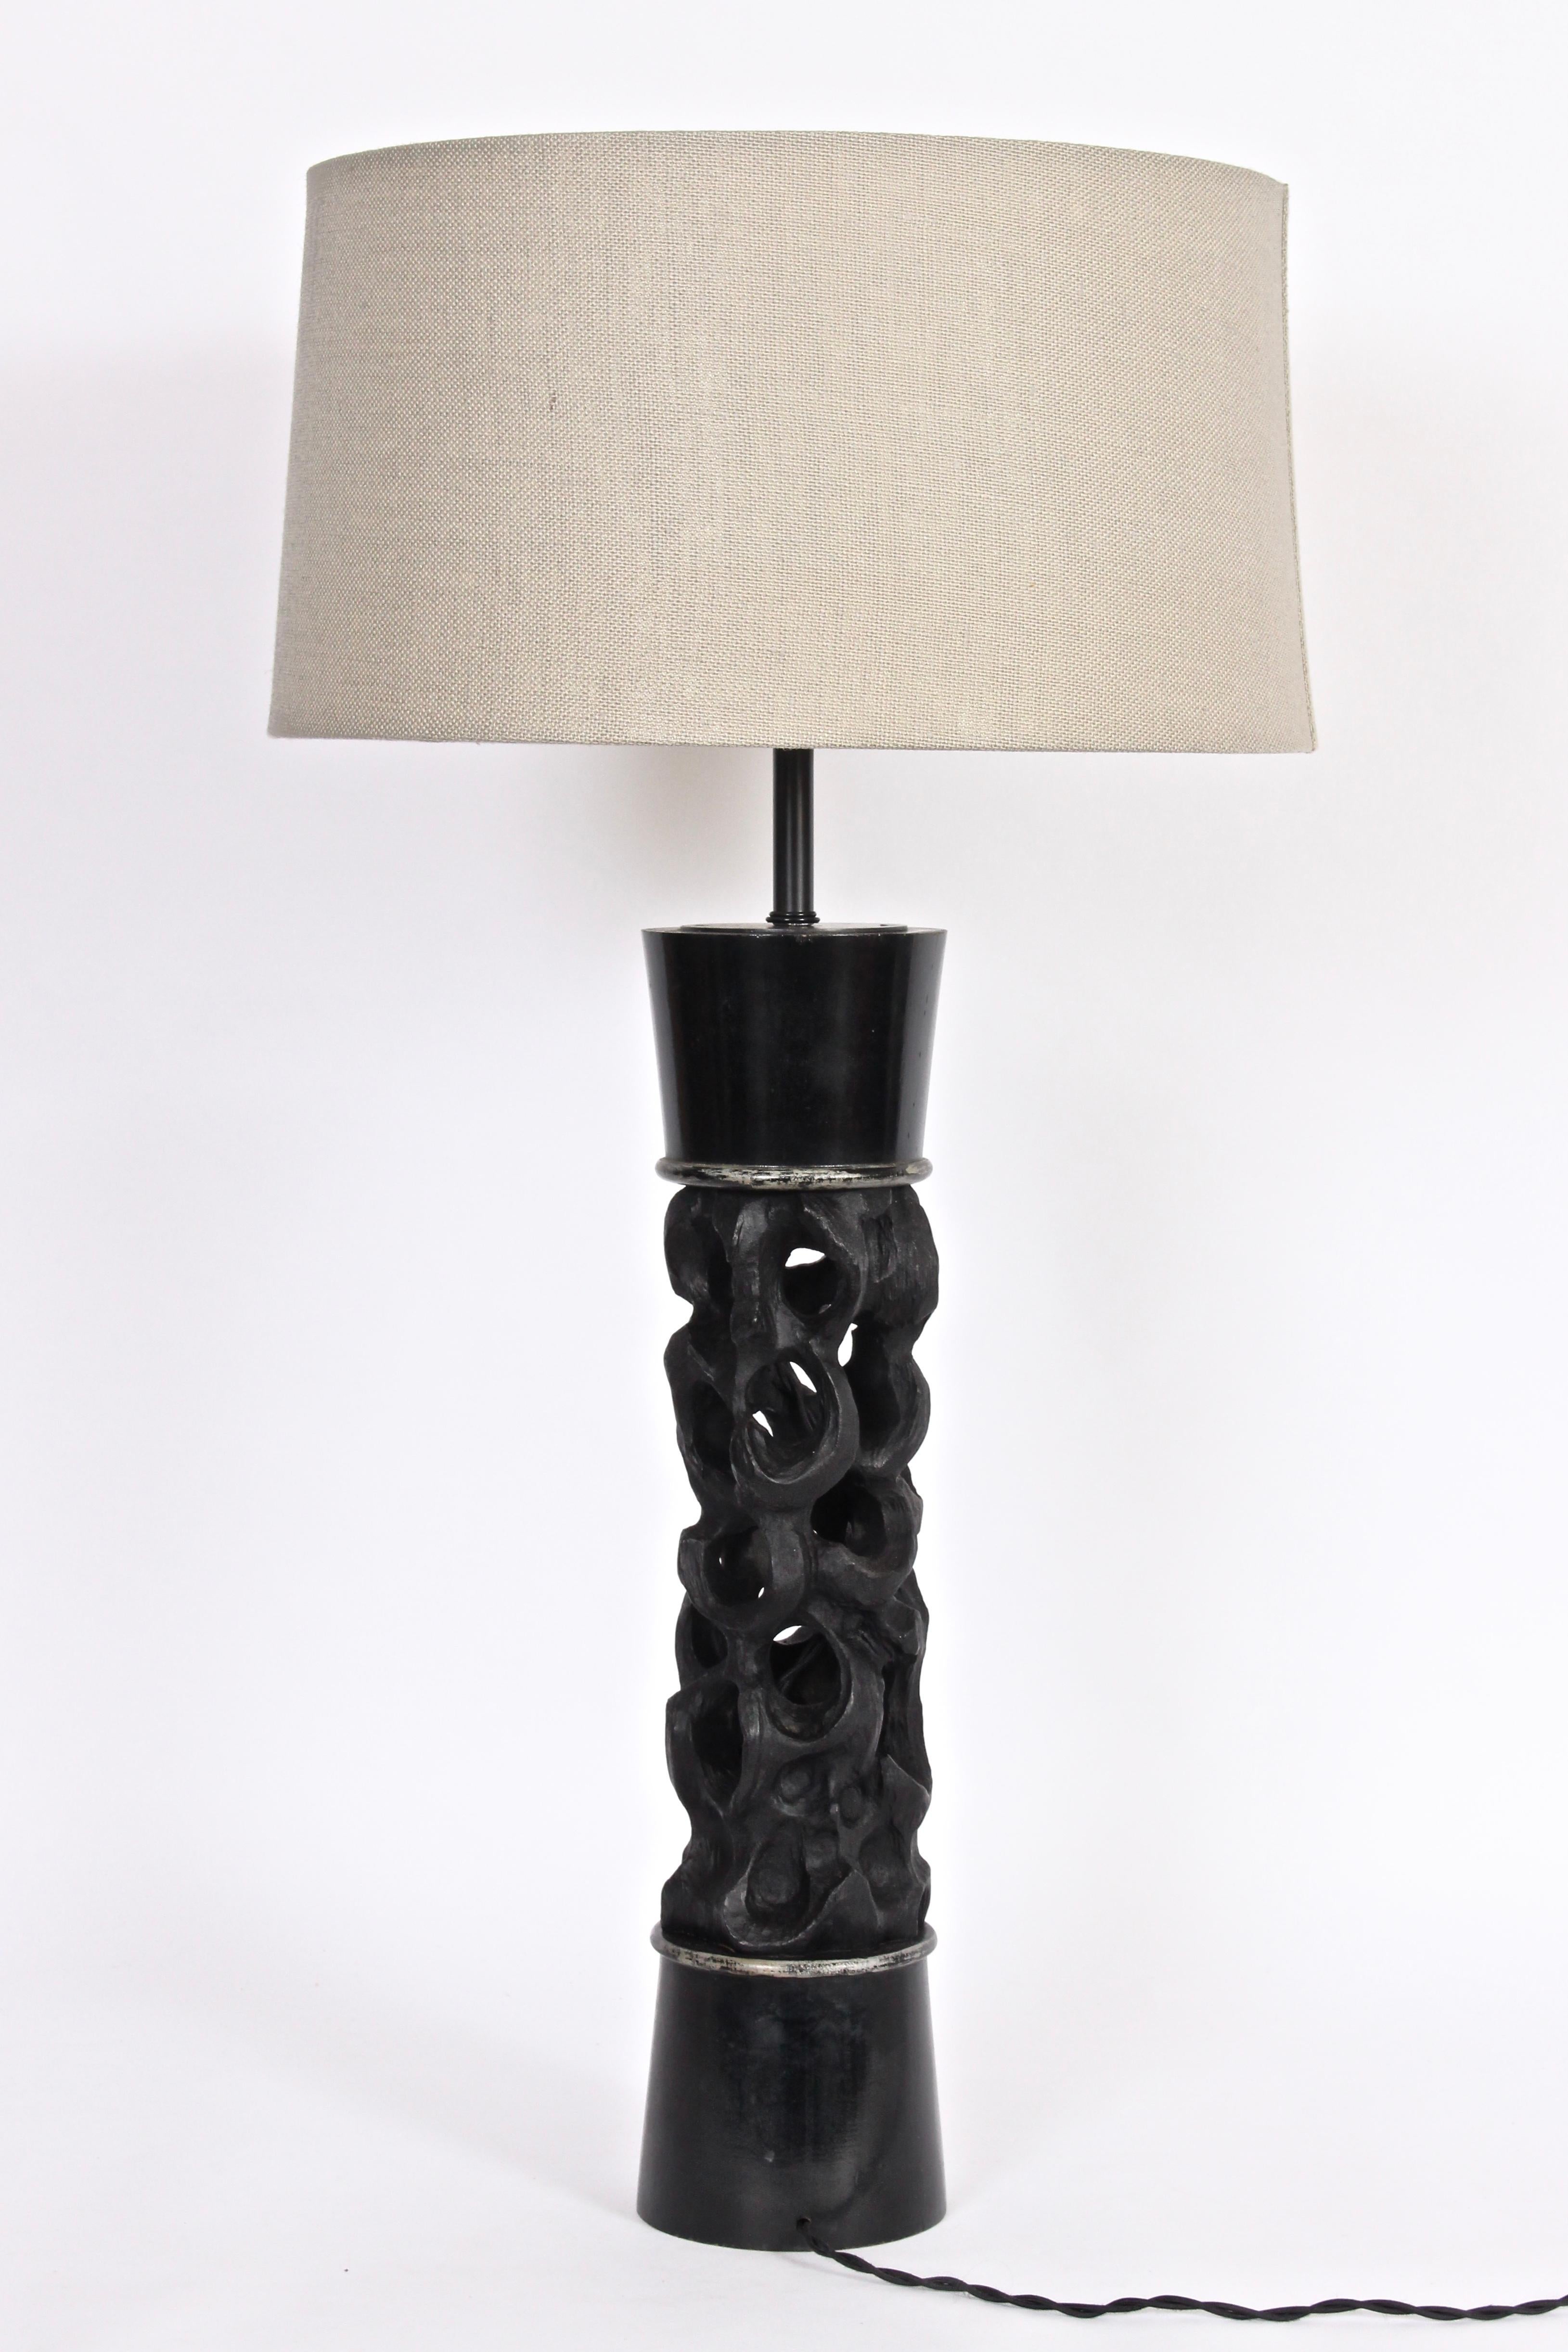 Substantial James Mont Carved Ebonized Wood Table Lamp, C. 1950 For Sale 5